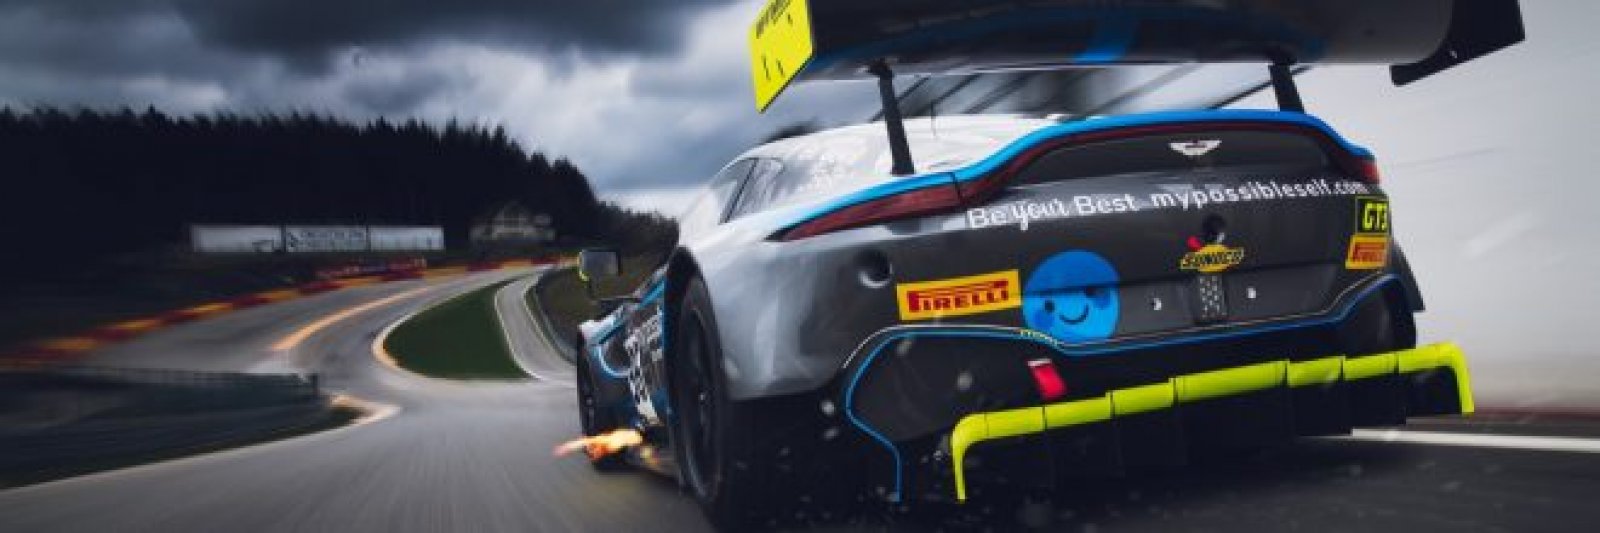 Optimum Motorsport intends to field two entries in the 2020 GT World Challenge Europe